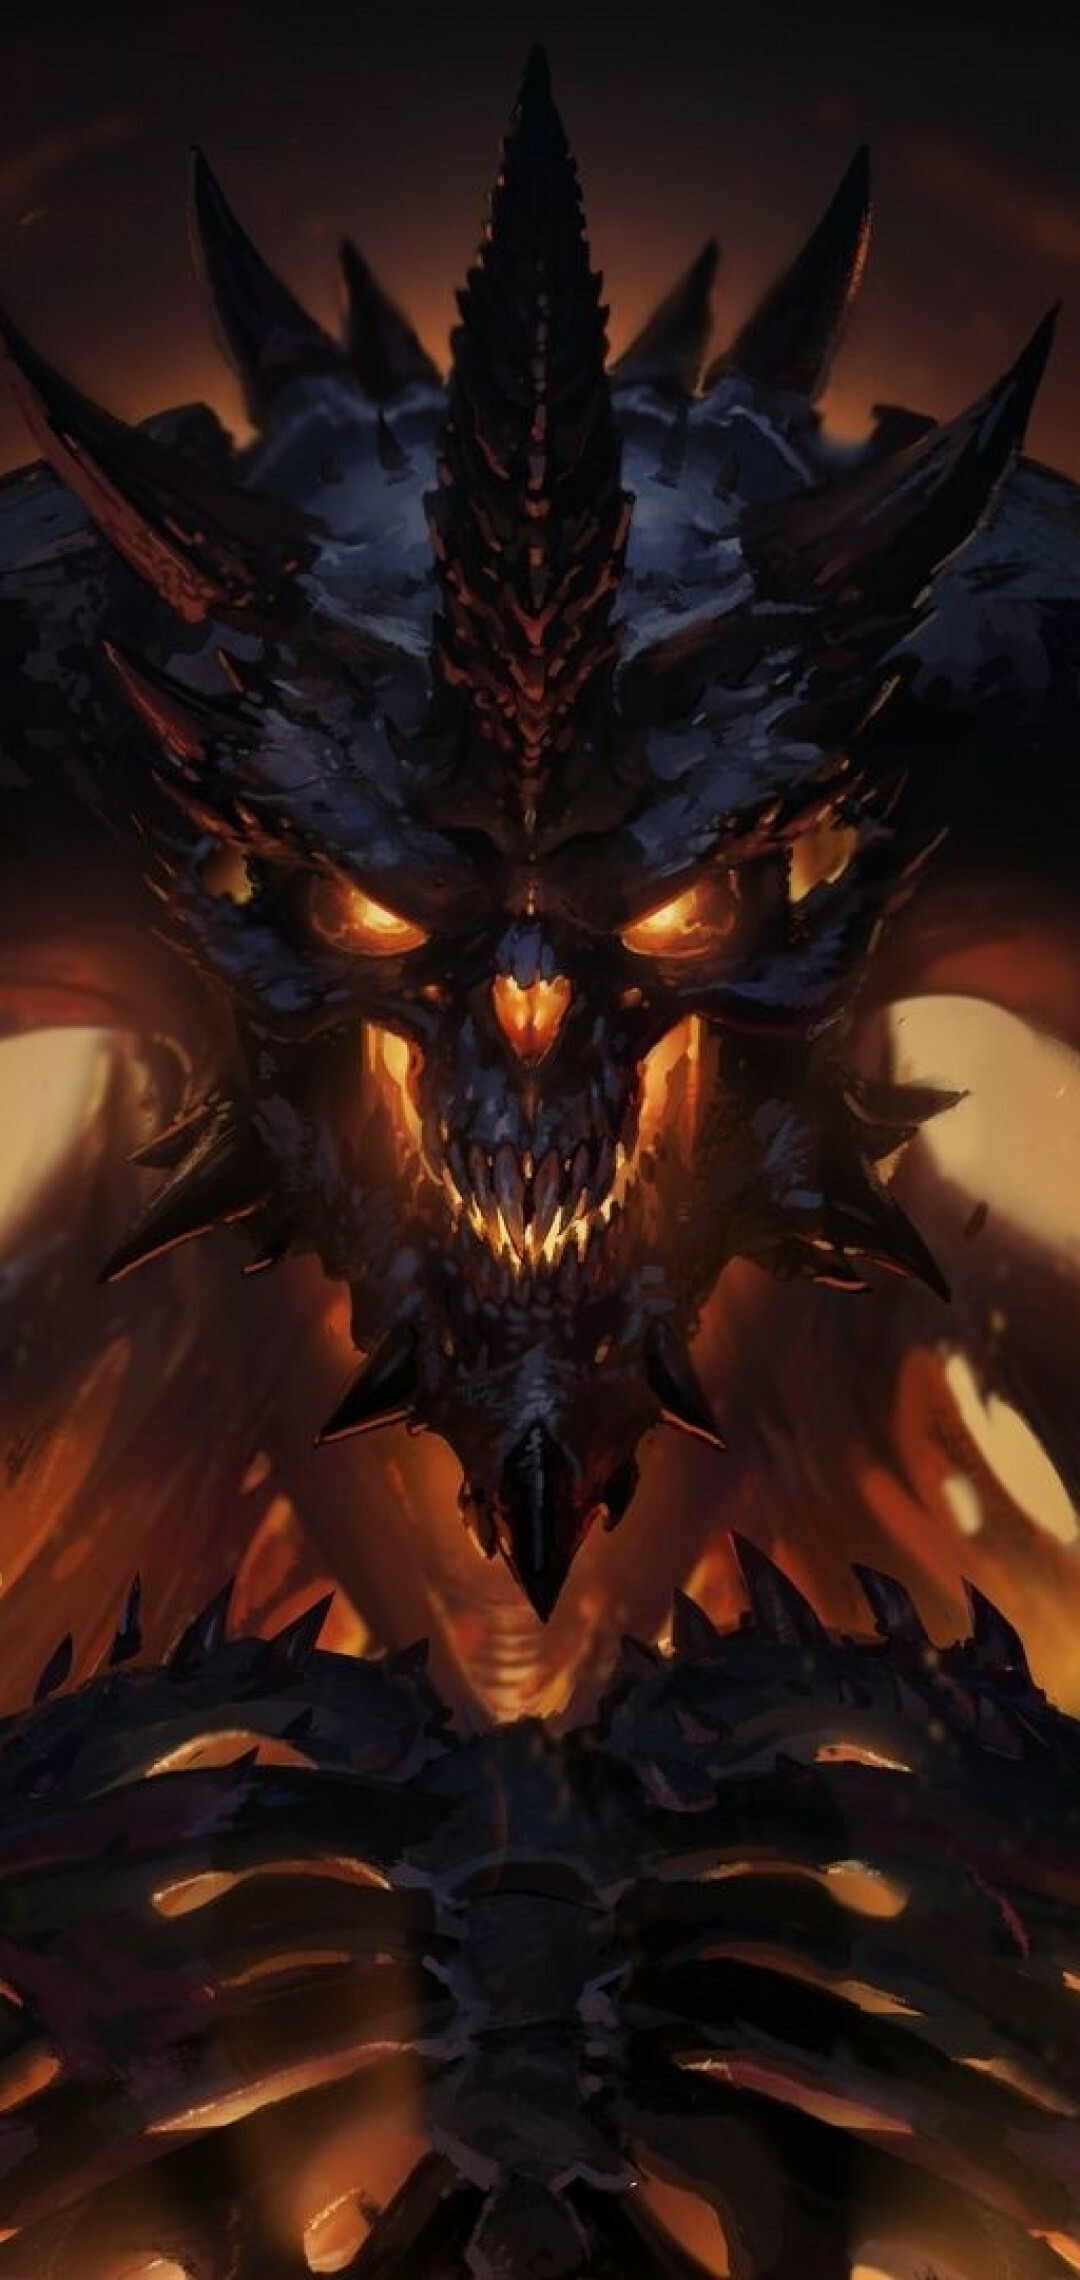 Diablo: The gameplay loop for the game series relies on a constant search for better weapons and armor, known as loot. 1080x2280 HD Wallpaper.